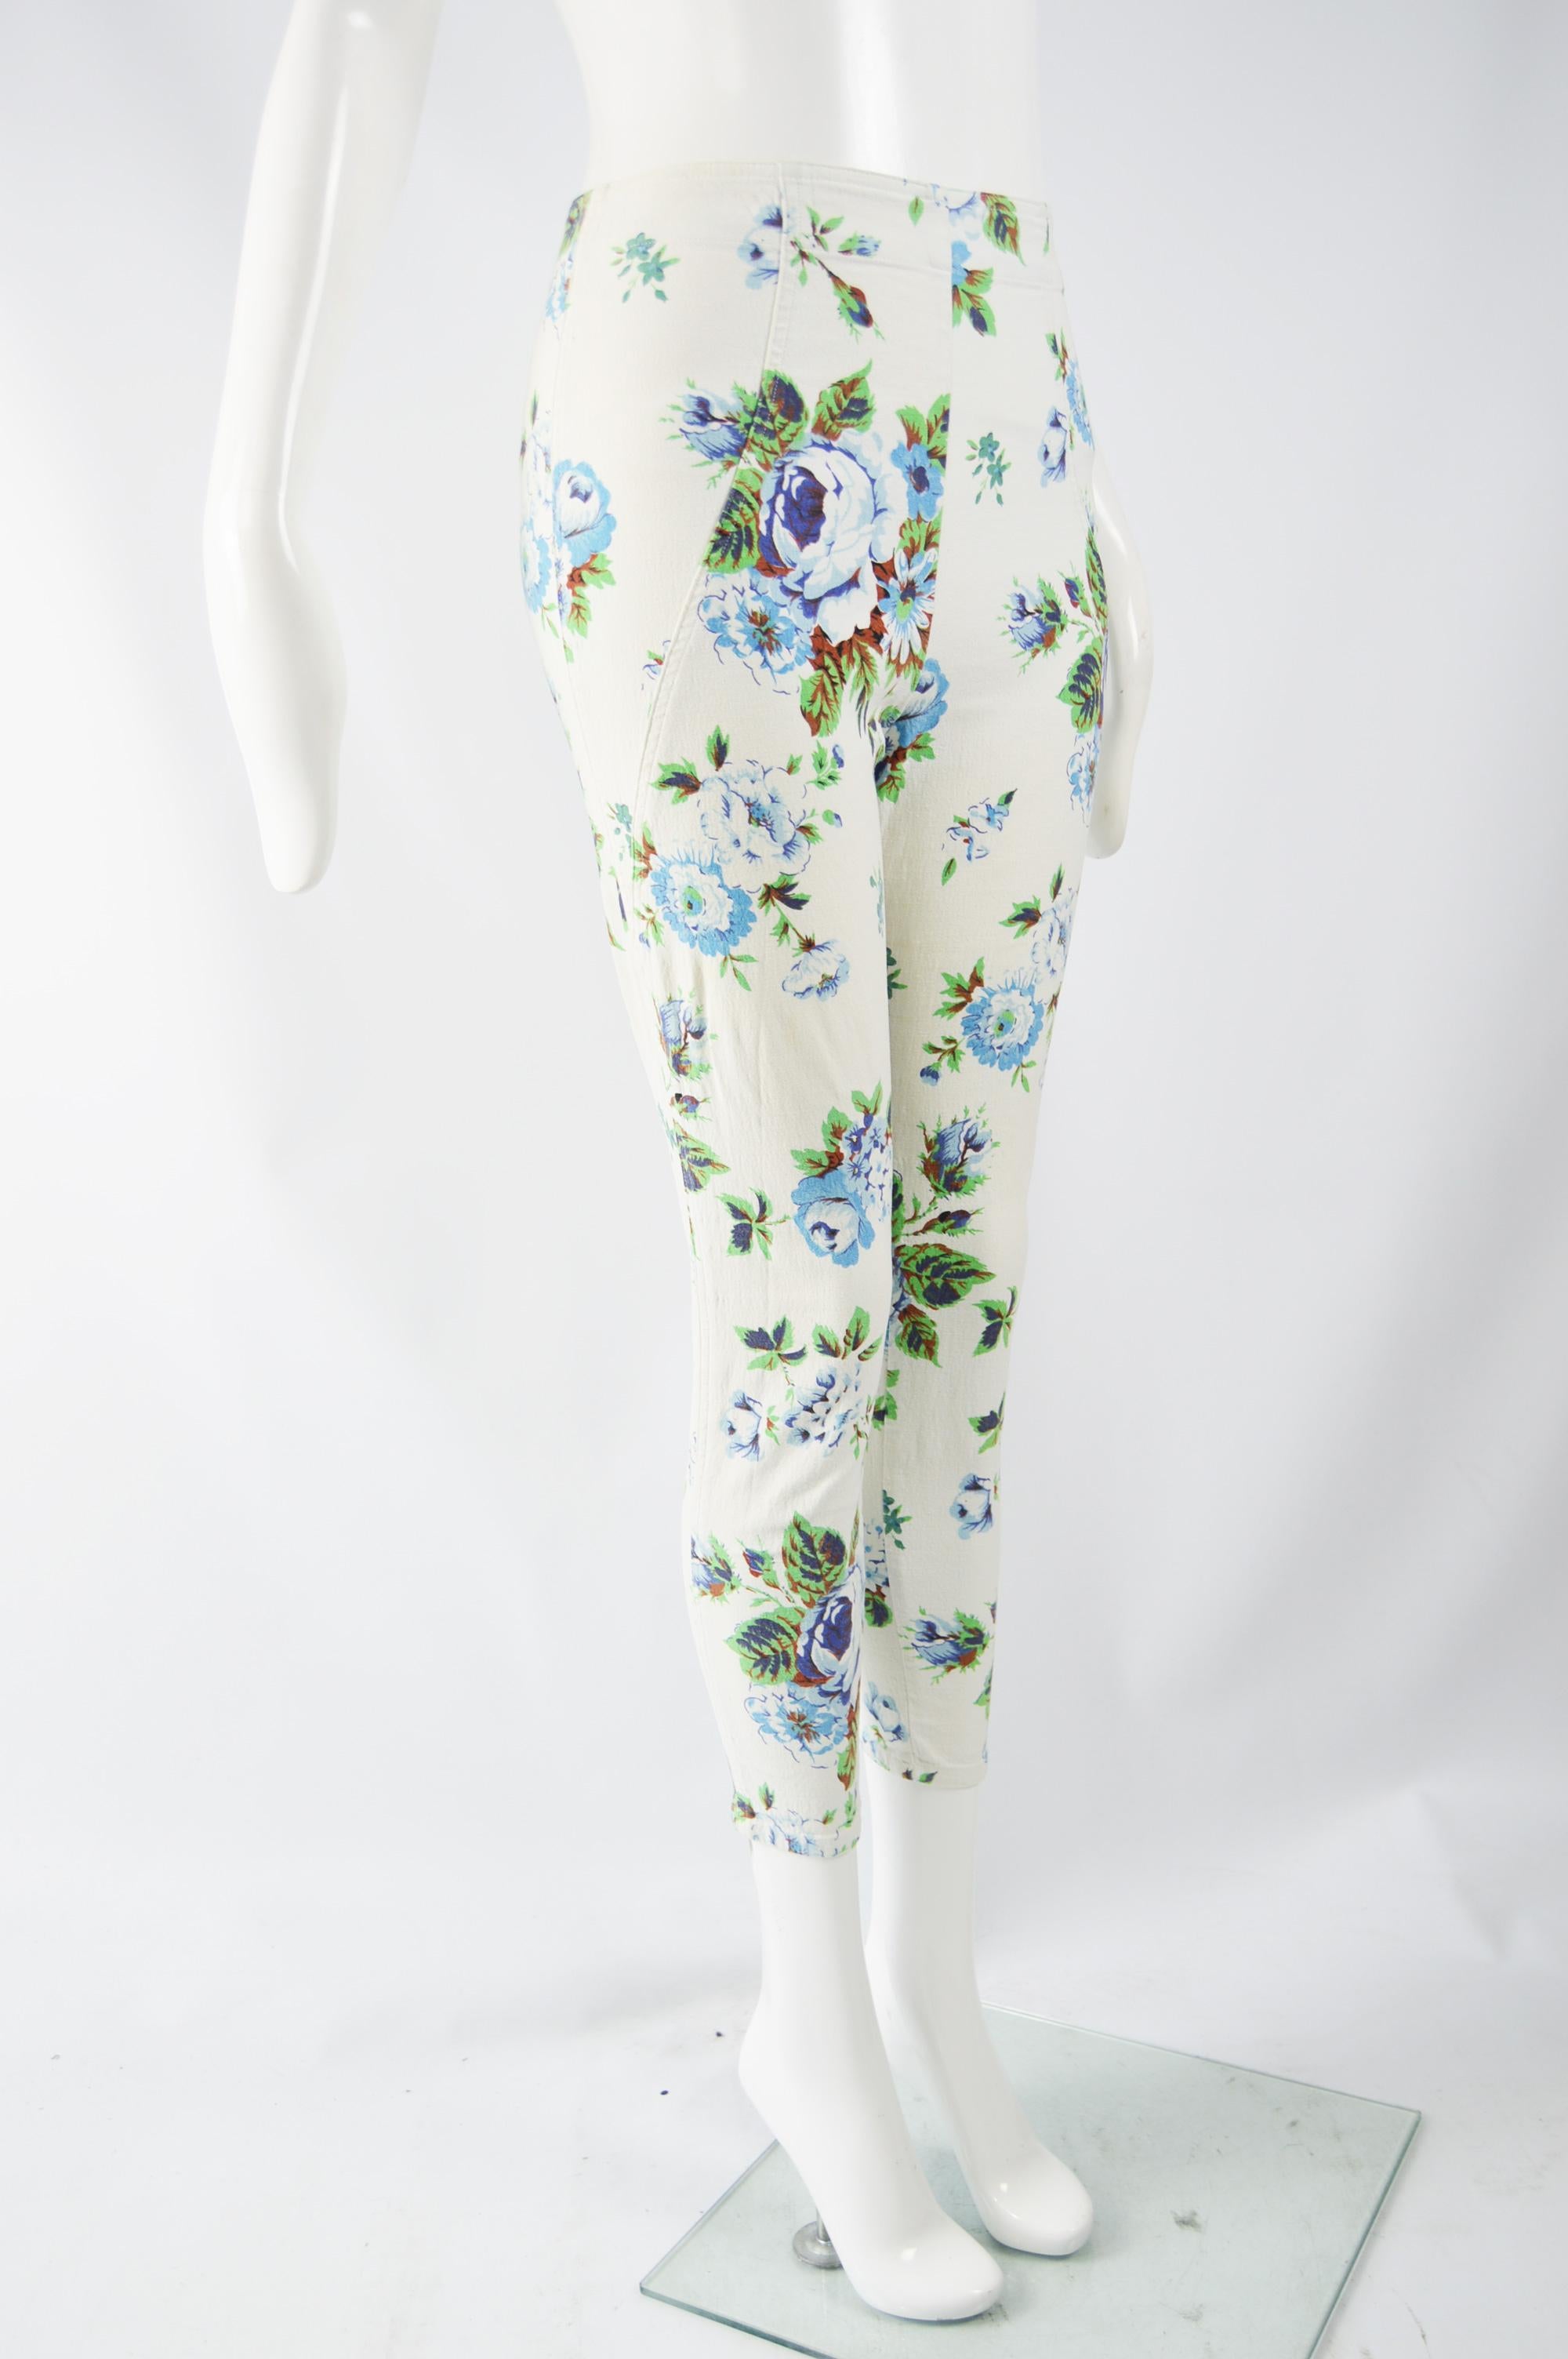 Kenzo Vintage Floral Cigarette Pants Jeans In Excellent Condition For Sale In Doncaster, South Yorkshire